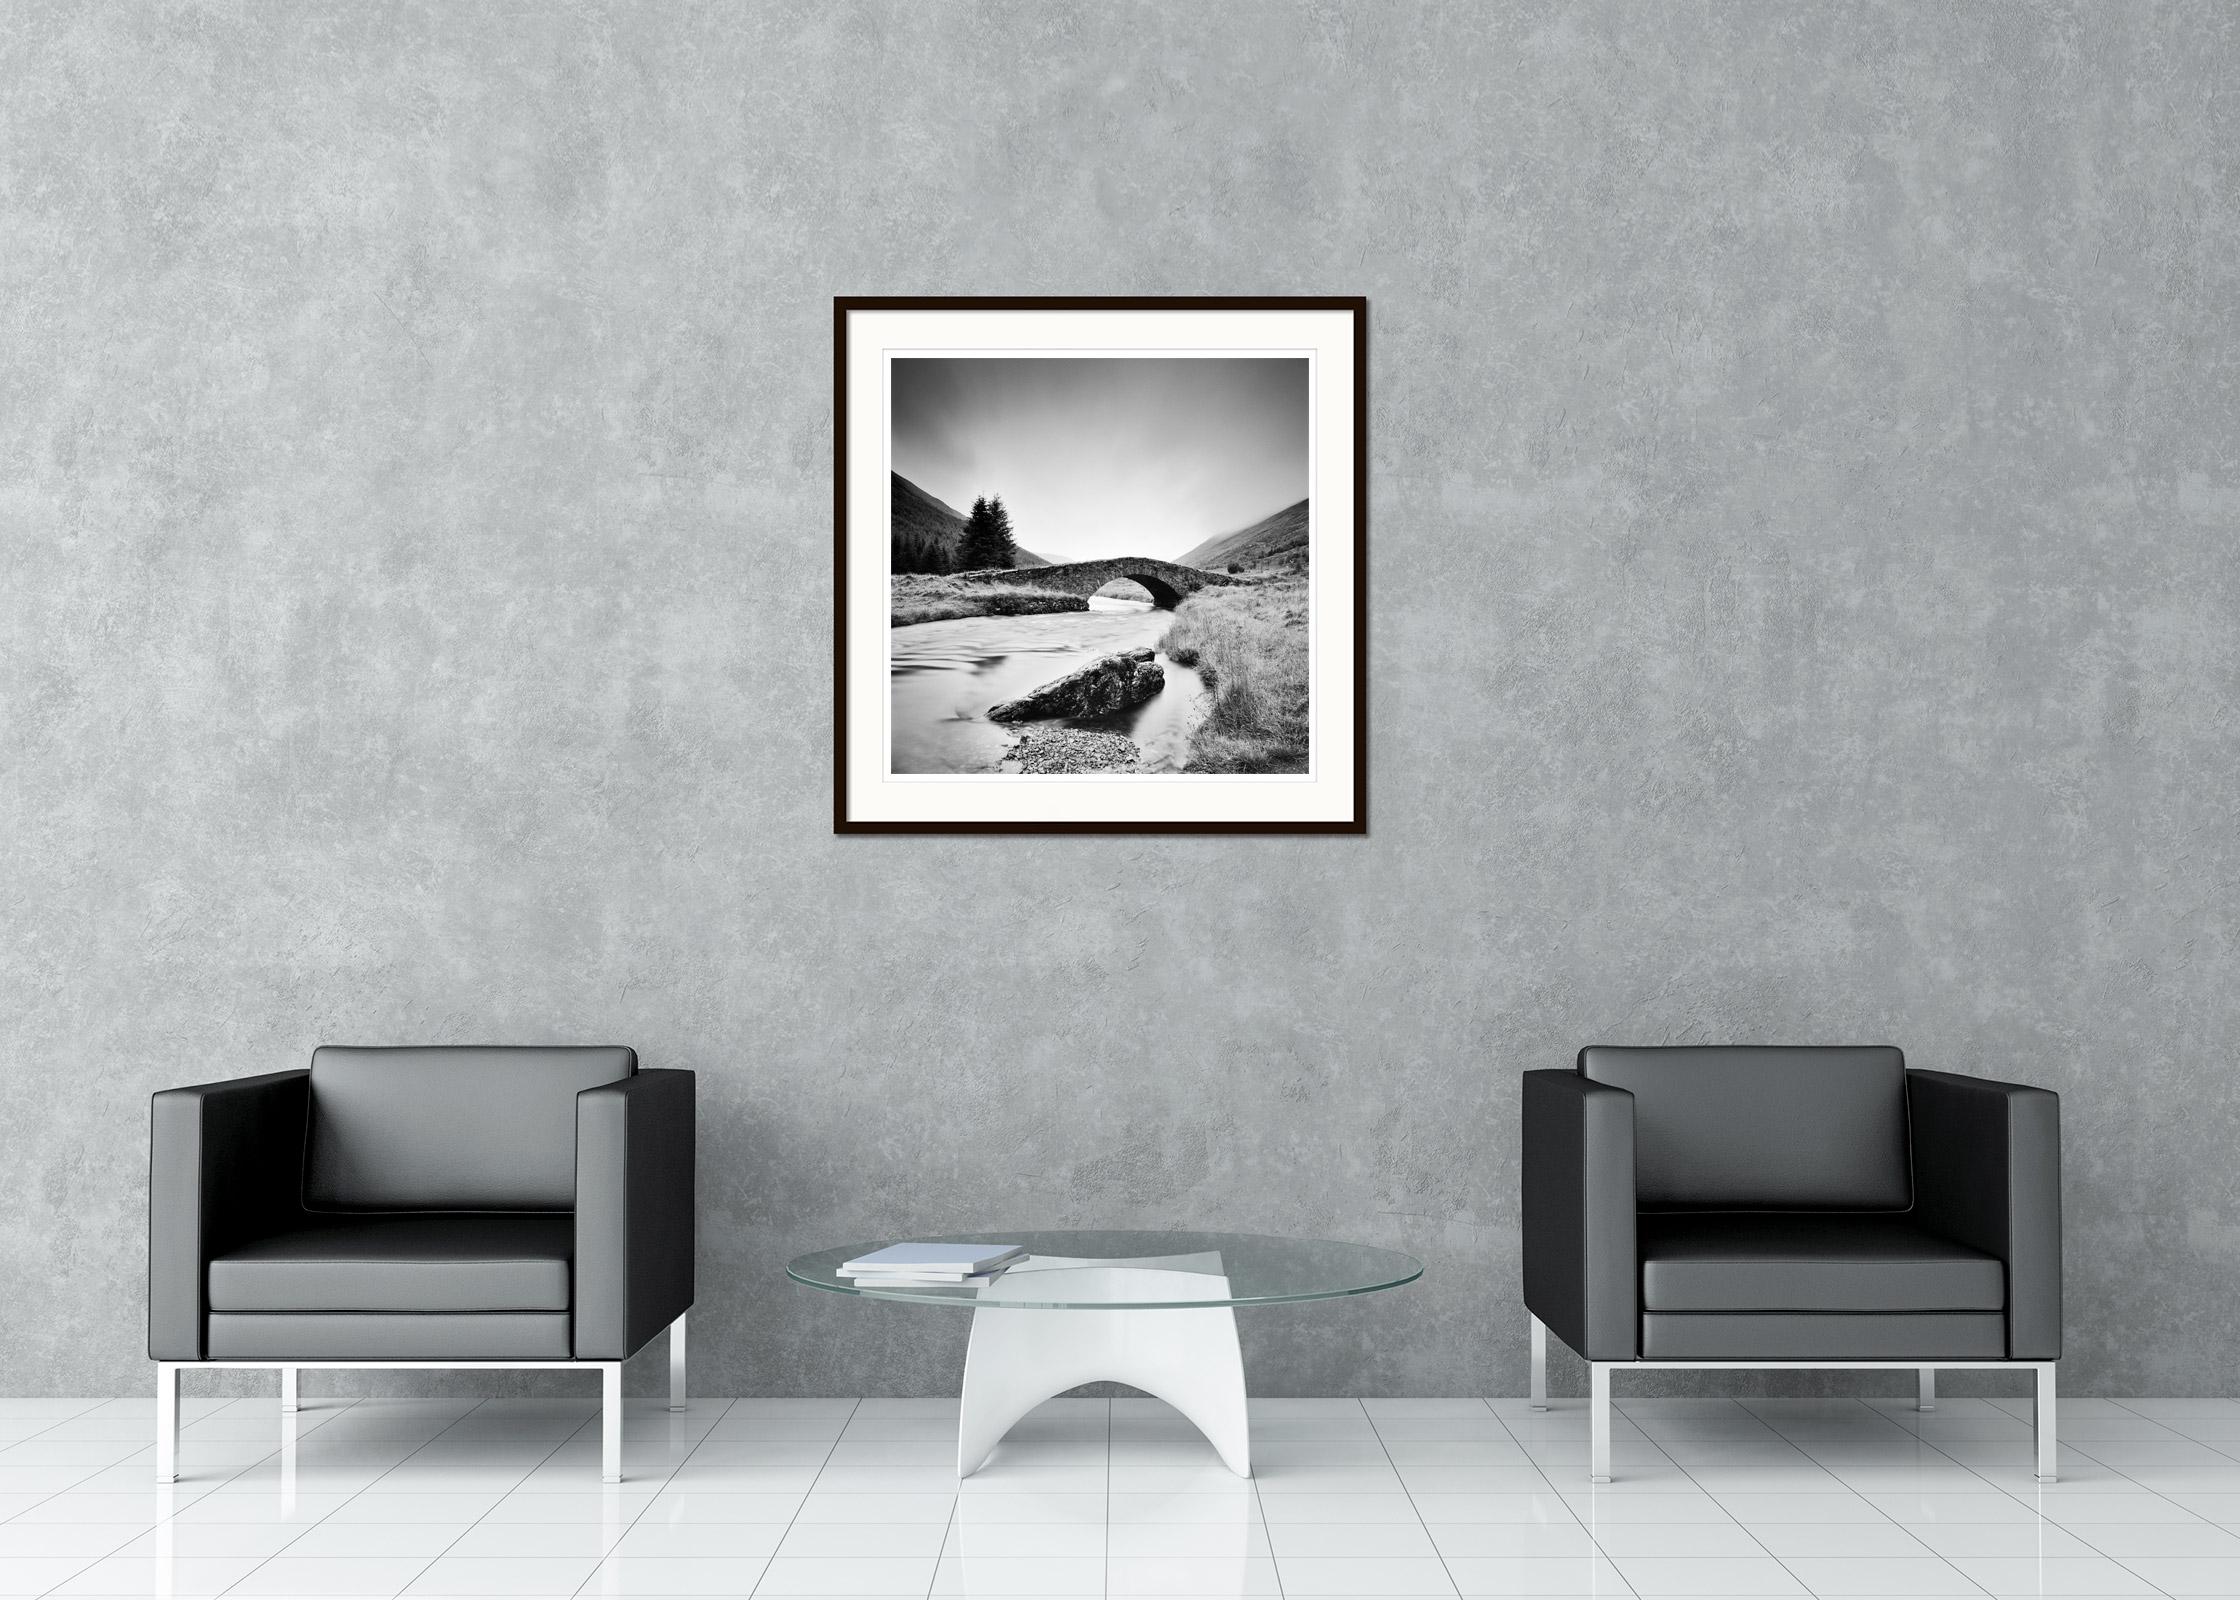 Black and White Fine Art minimalist photography - Old stone bridge over a river in the highlands of Scotland. Archival pigment ink print, edition of 9. Signed, titled, dated and numbered by artist. Certificate of authenticity included. Printed with